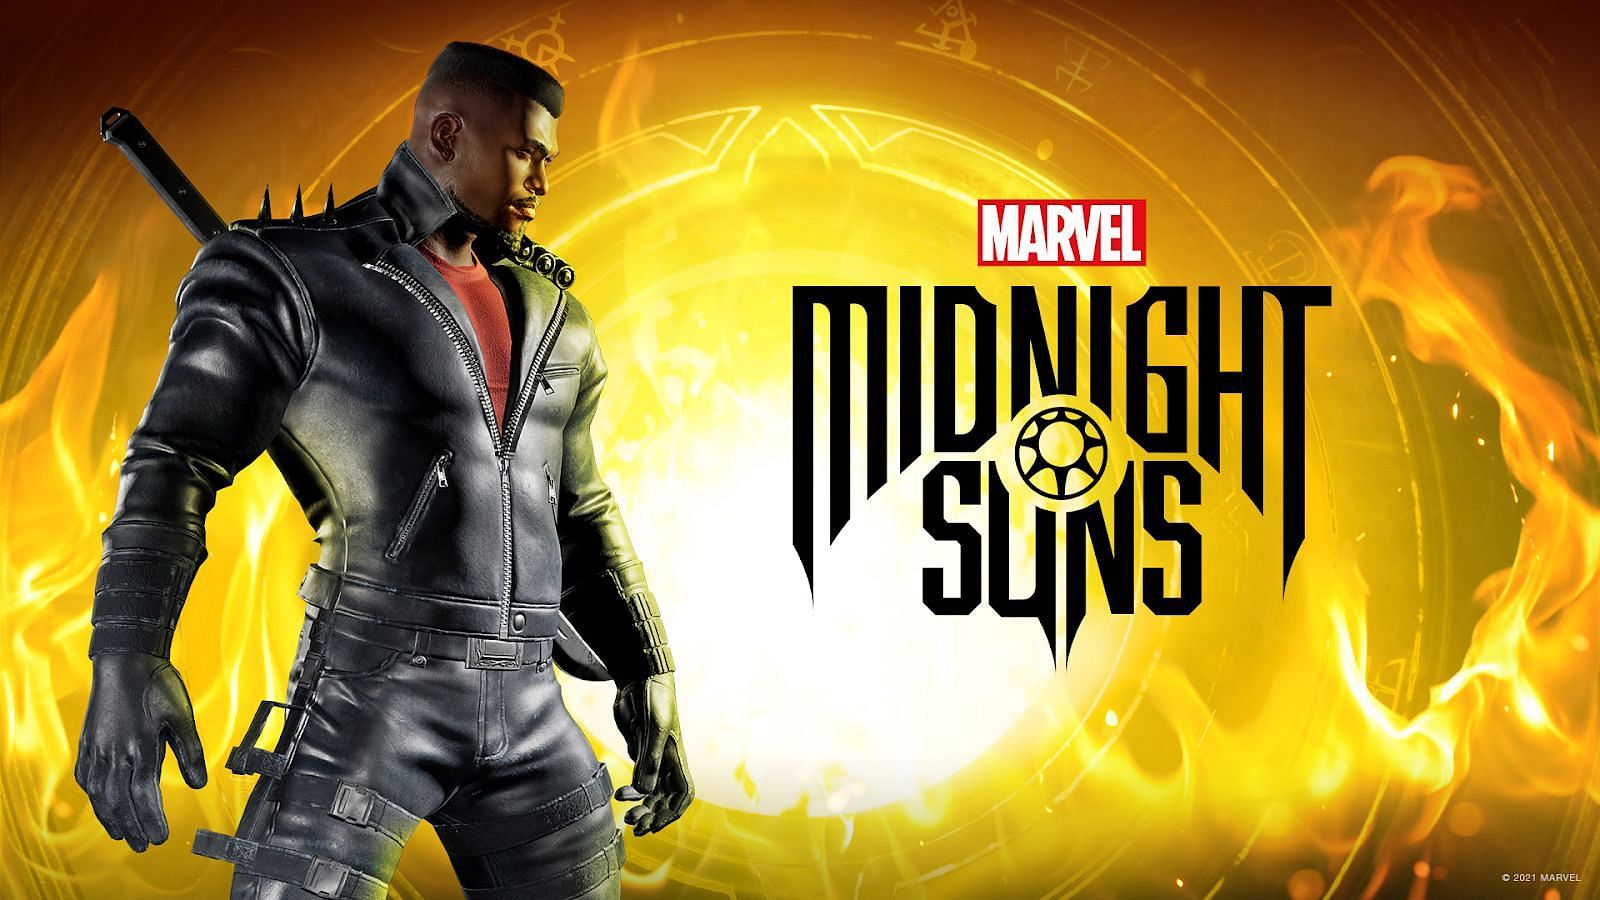 What is Marvel's Midnight Suns About?